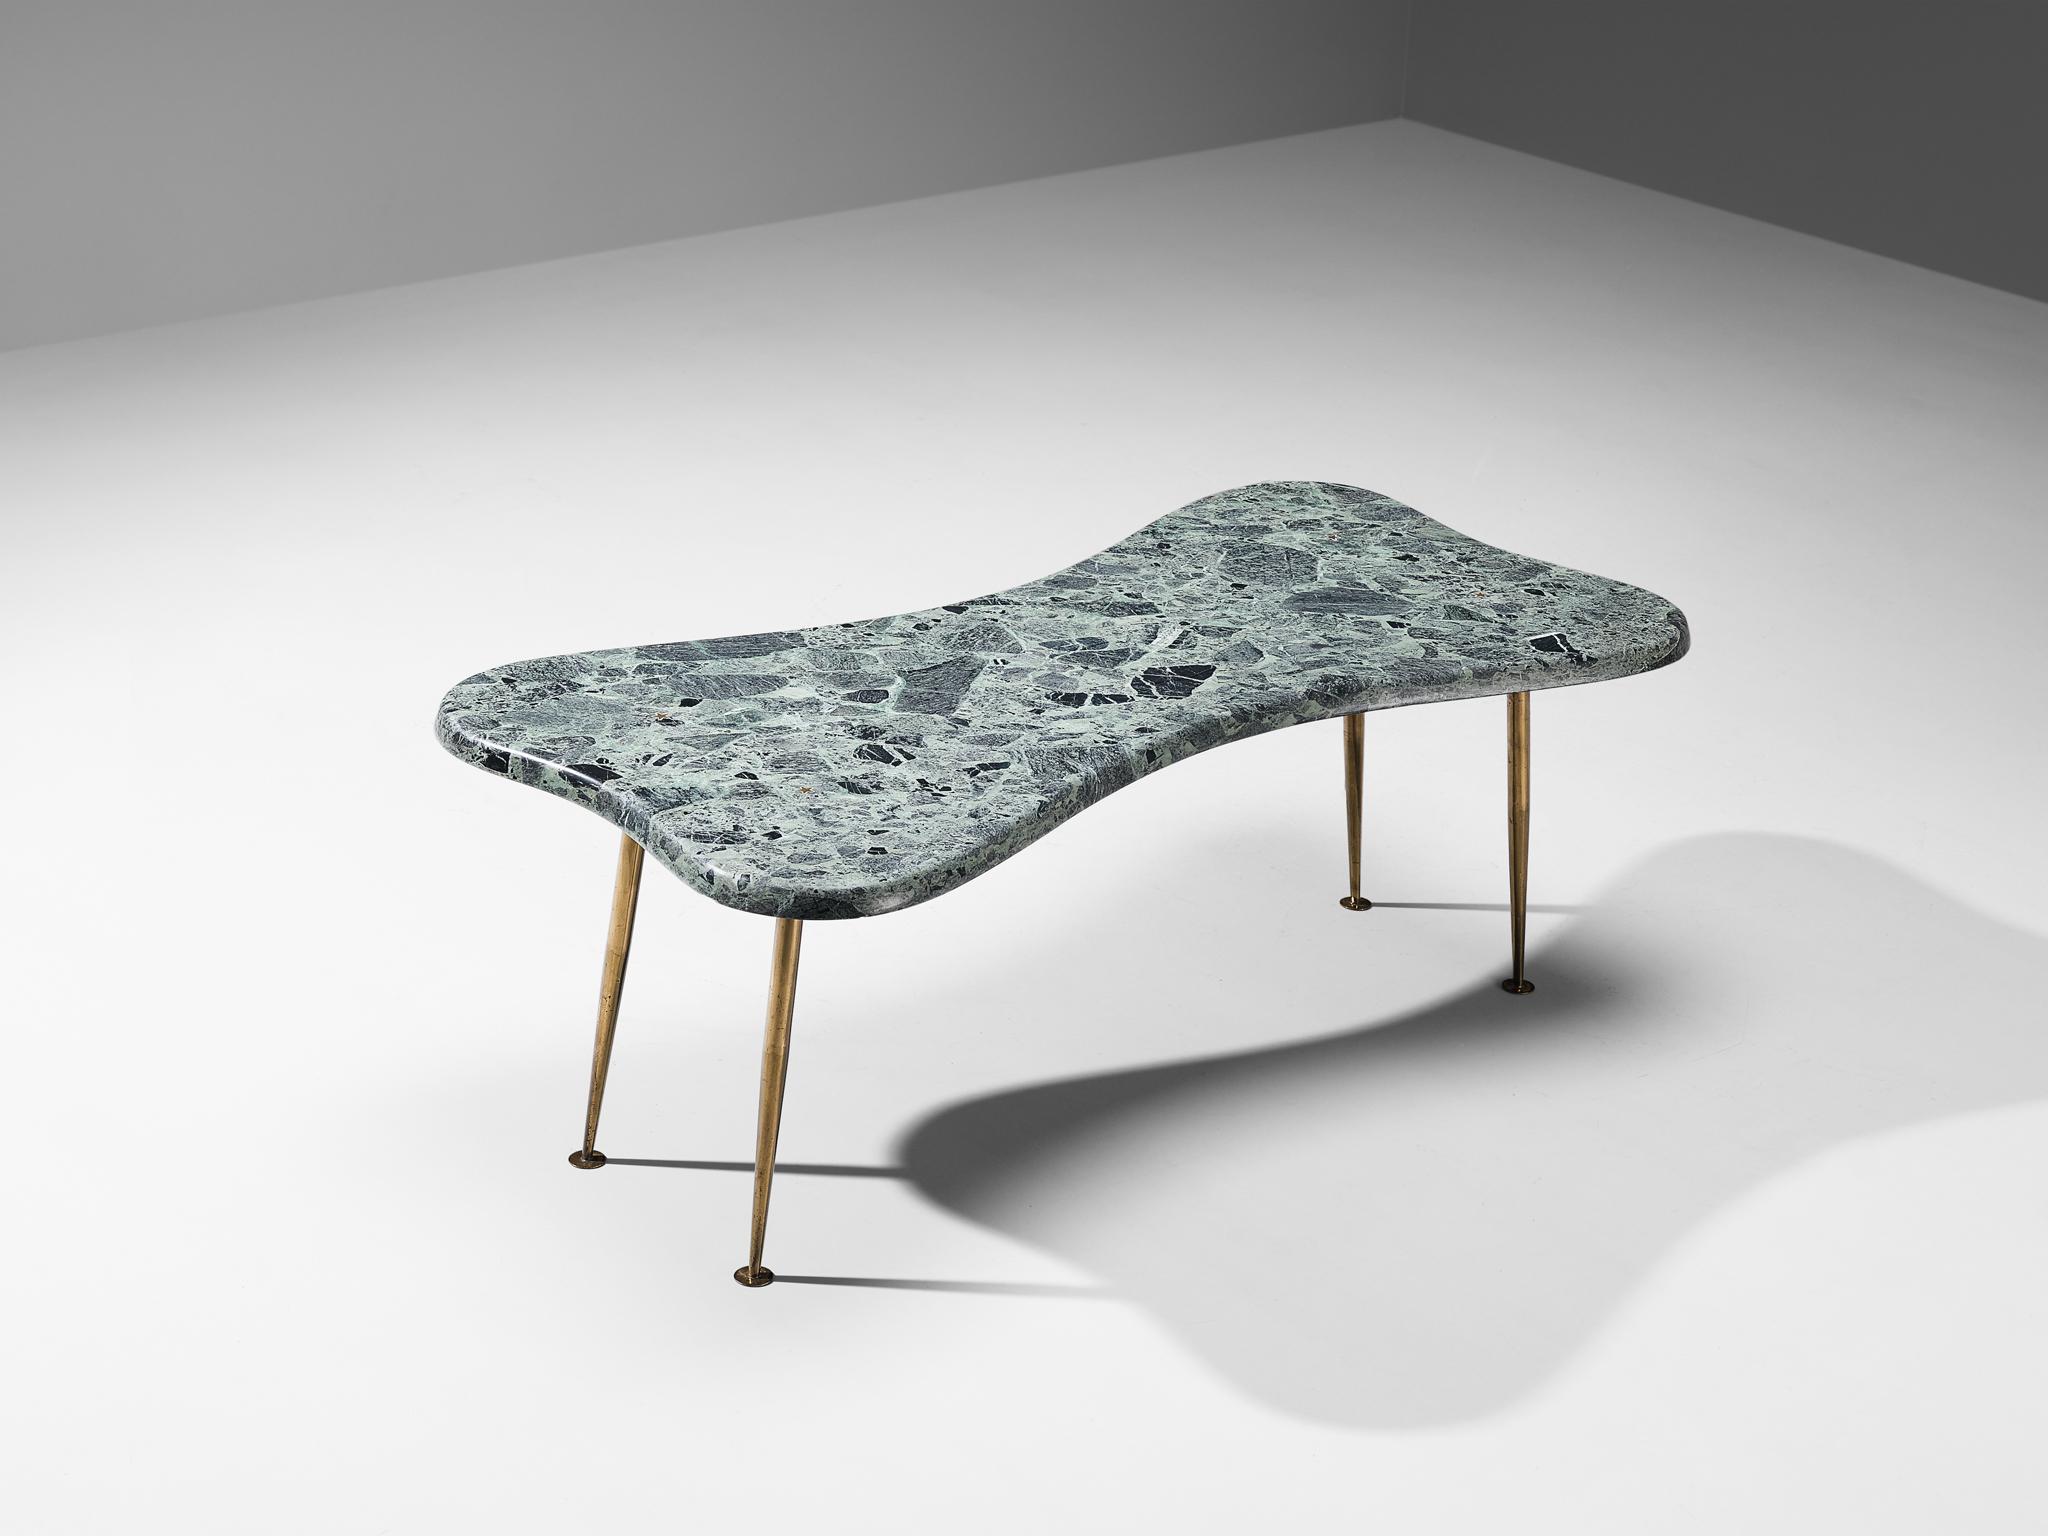 Coffee table, marble, brass, bronze Italy, 1950s

Hailing from a skilled artisan of Italy, this exceptional coffee table reflects the design principles of the Mid-Century era that rose to prominence in the 1950s. The design serves as a testament to